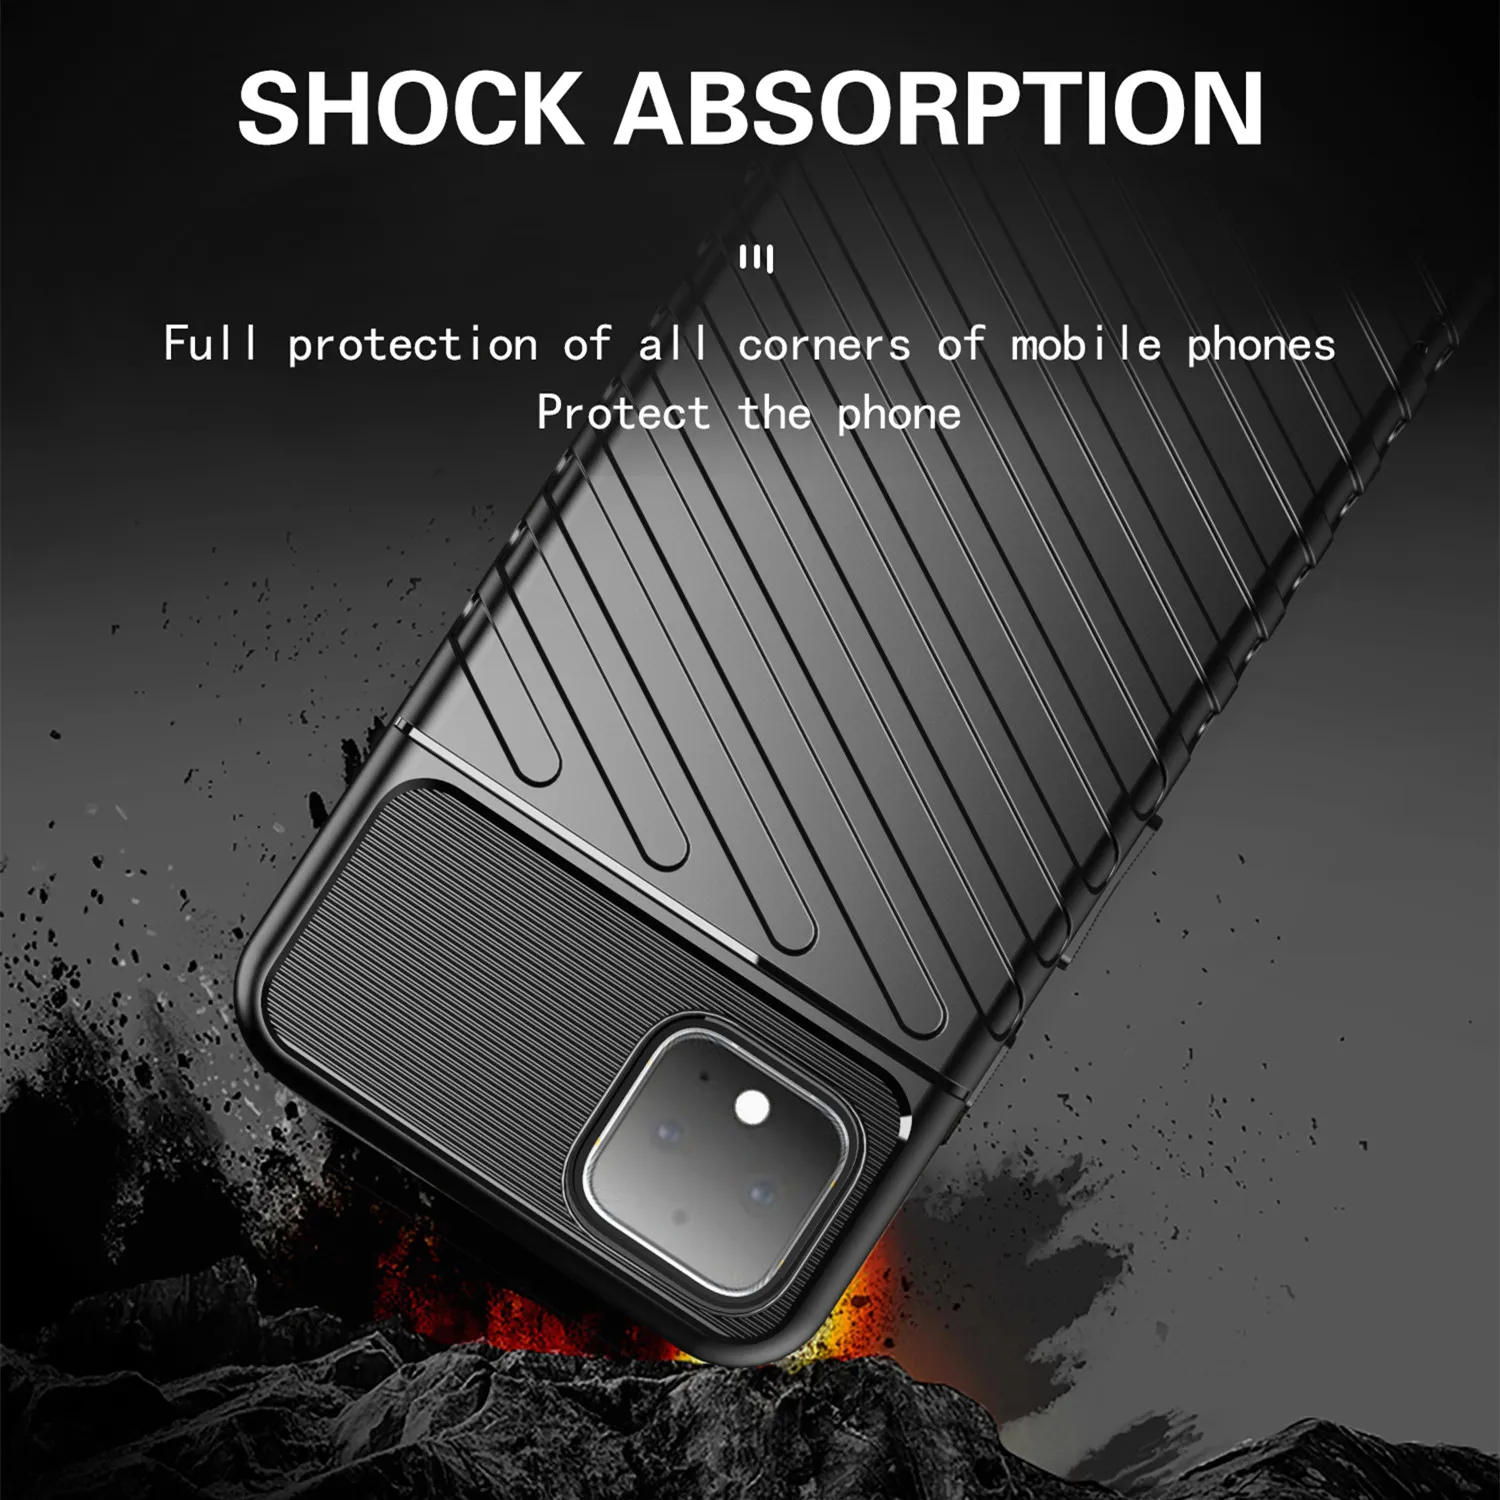 Fashion Non-Slip Thunder Case For Google Pixel 4 XL 4a 5g Shockproof Half-wrapped Cover for pixel 4 4xl 4a Full Protect Cases